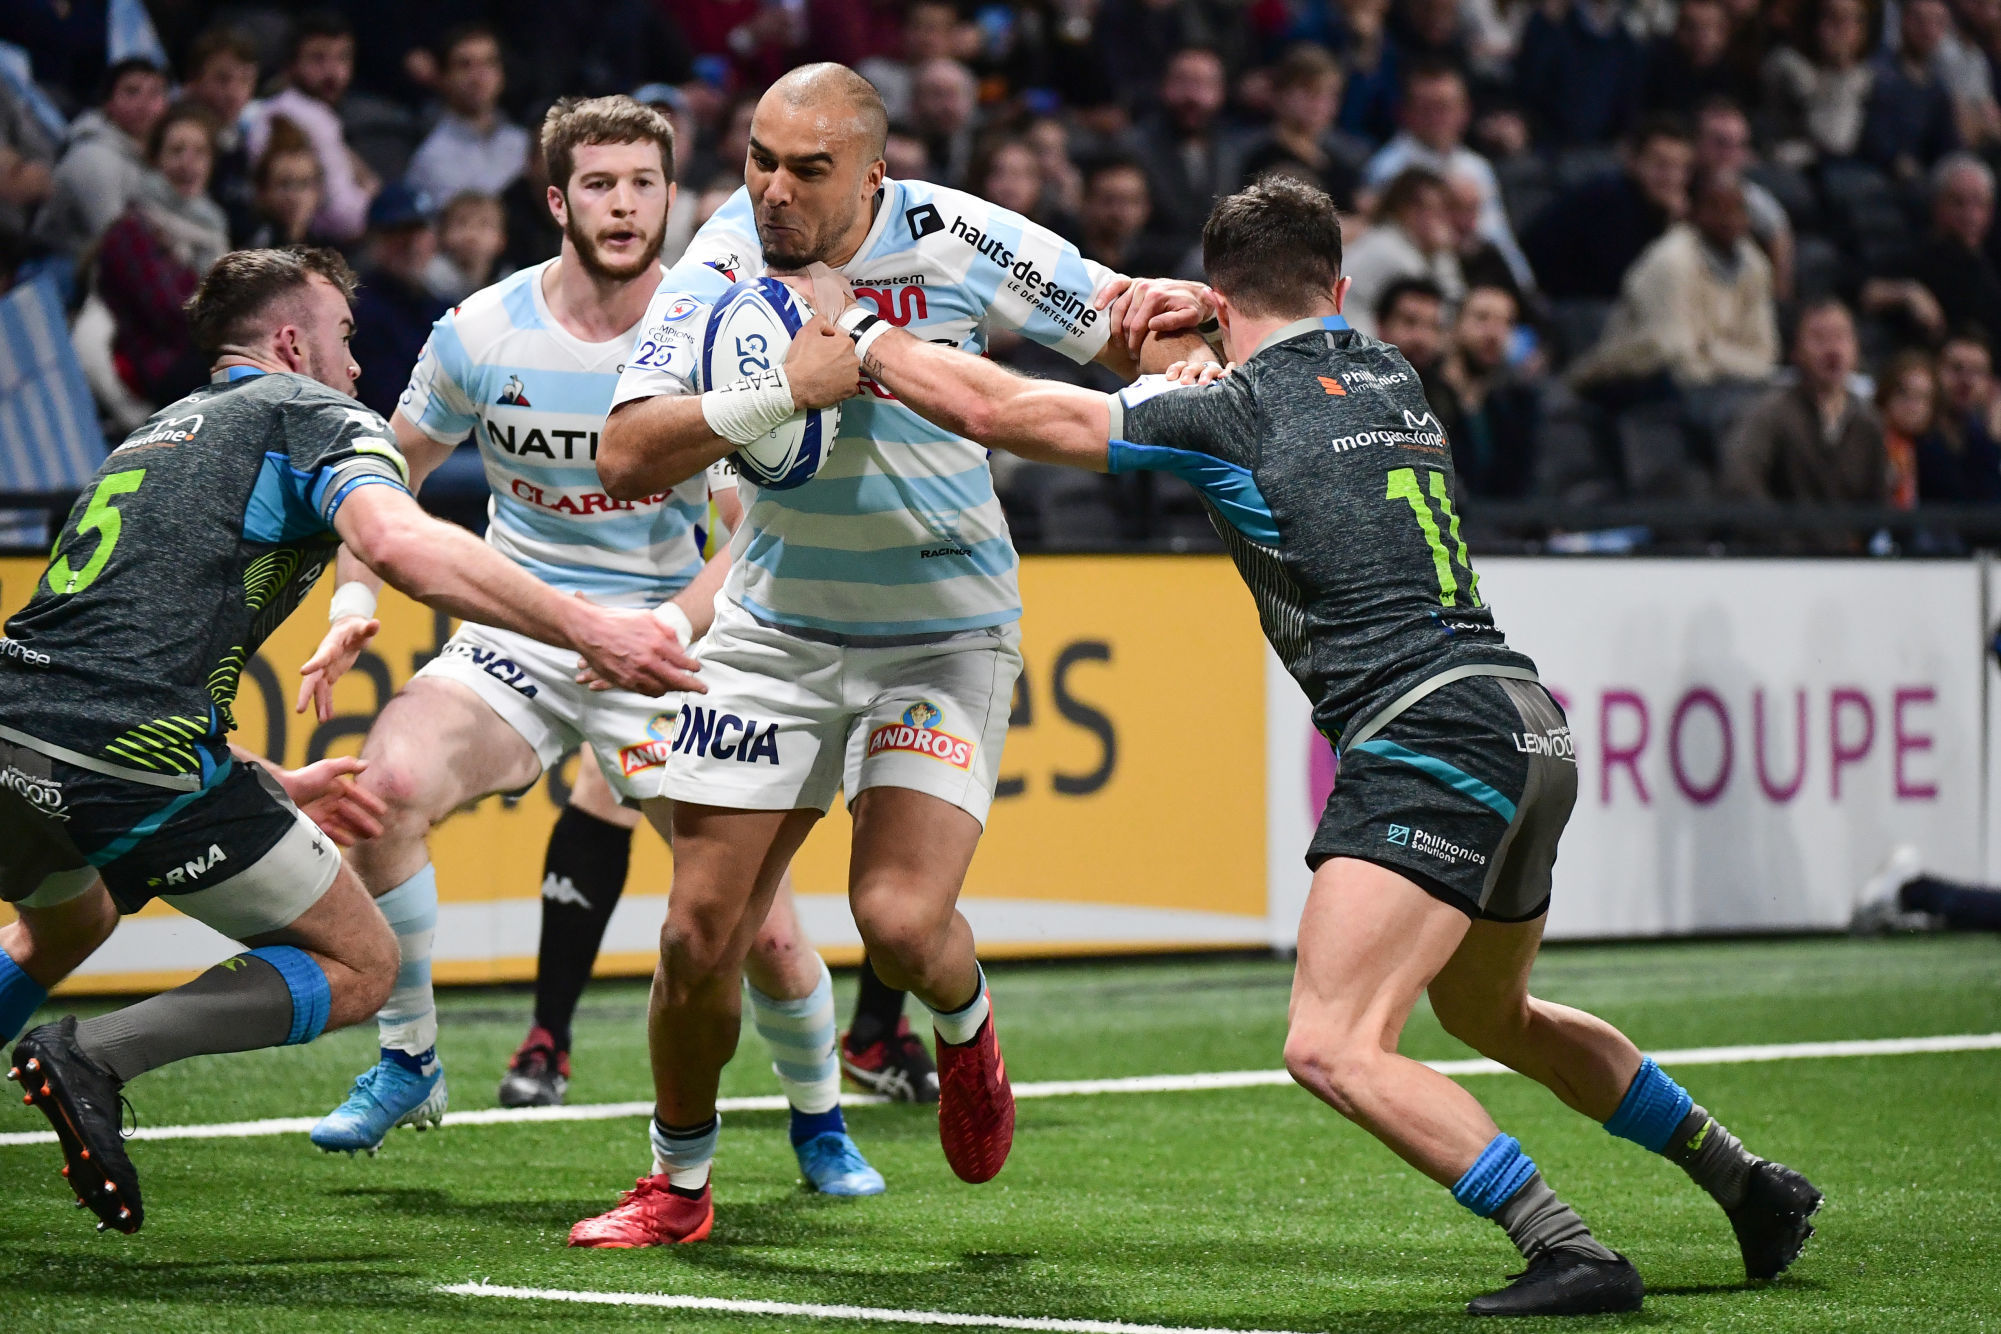 Simon ZEBO of Racing 92 during the European Rugby Champions Cup, Pool 4 match between Racing 92 and Ospreys on December 13, 2019 in Nanterre, France. (Photo by Dave Winter/Icon Sport) - Paris La Defense Arena - Paris (France)